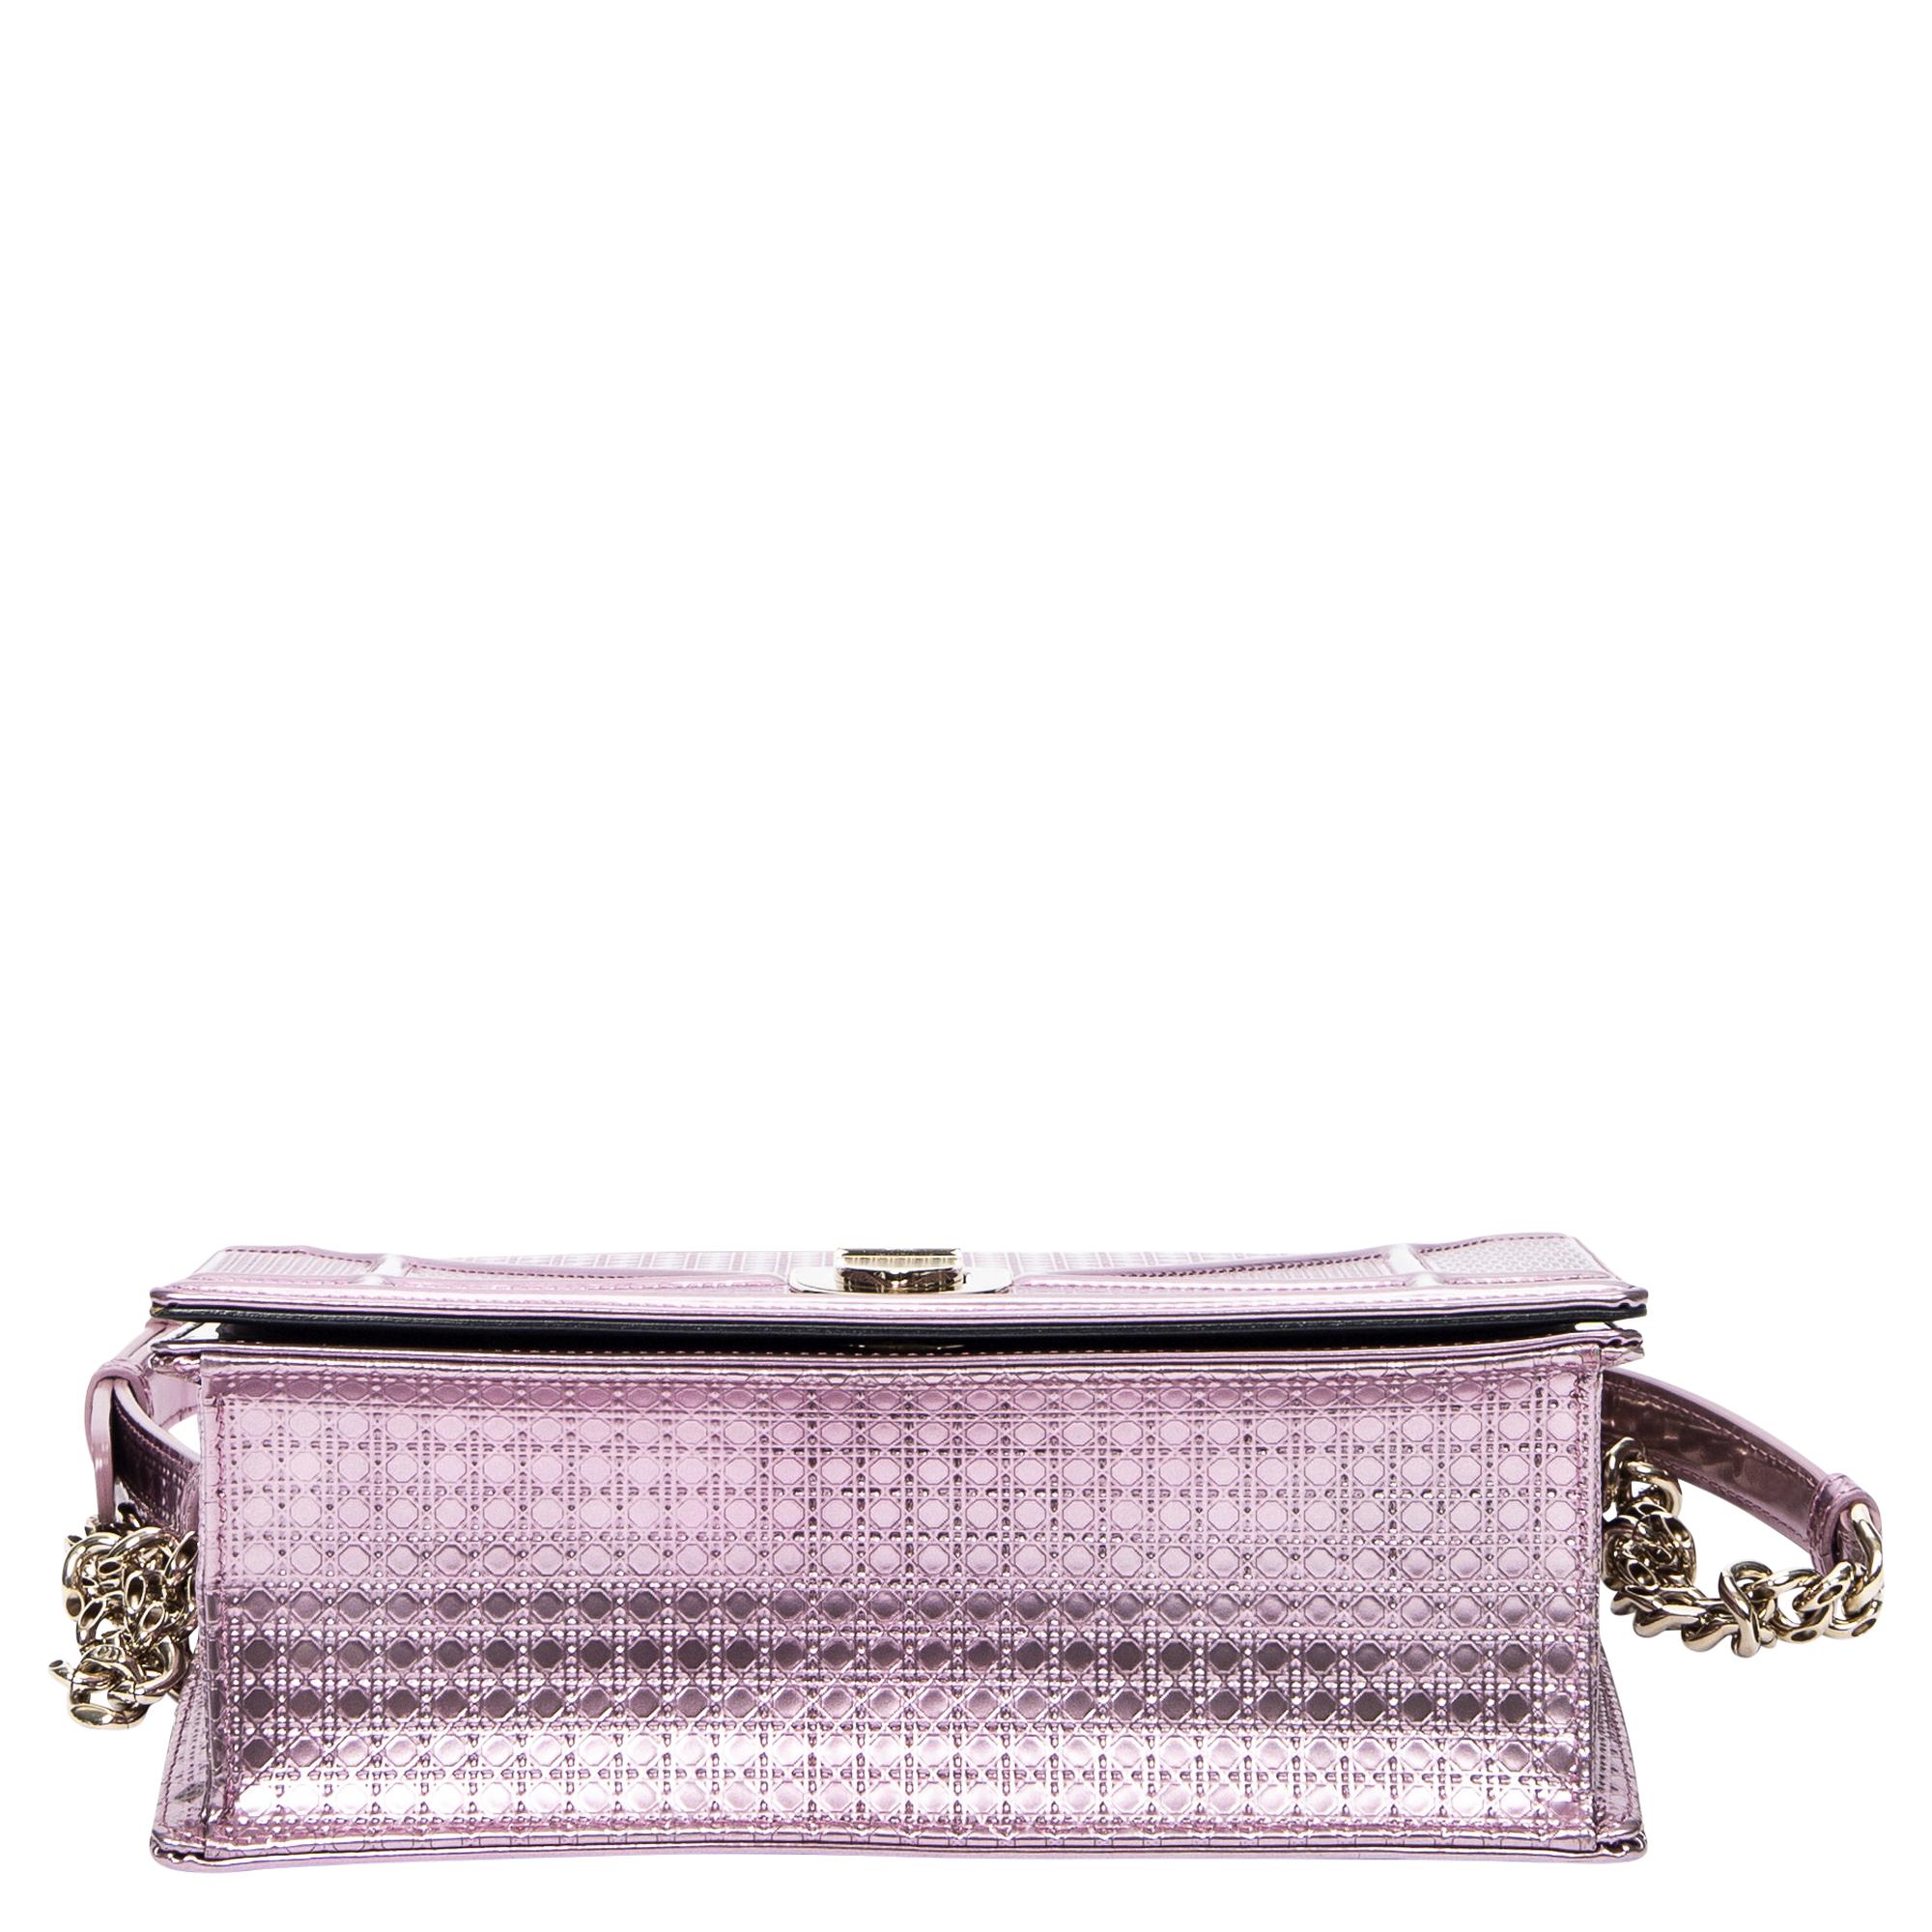 Women's or Men's Dior 2018 Metallic Pink Cannage Crossbody Bag For Sale